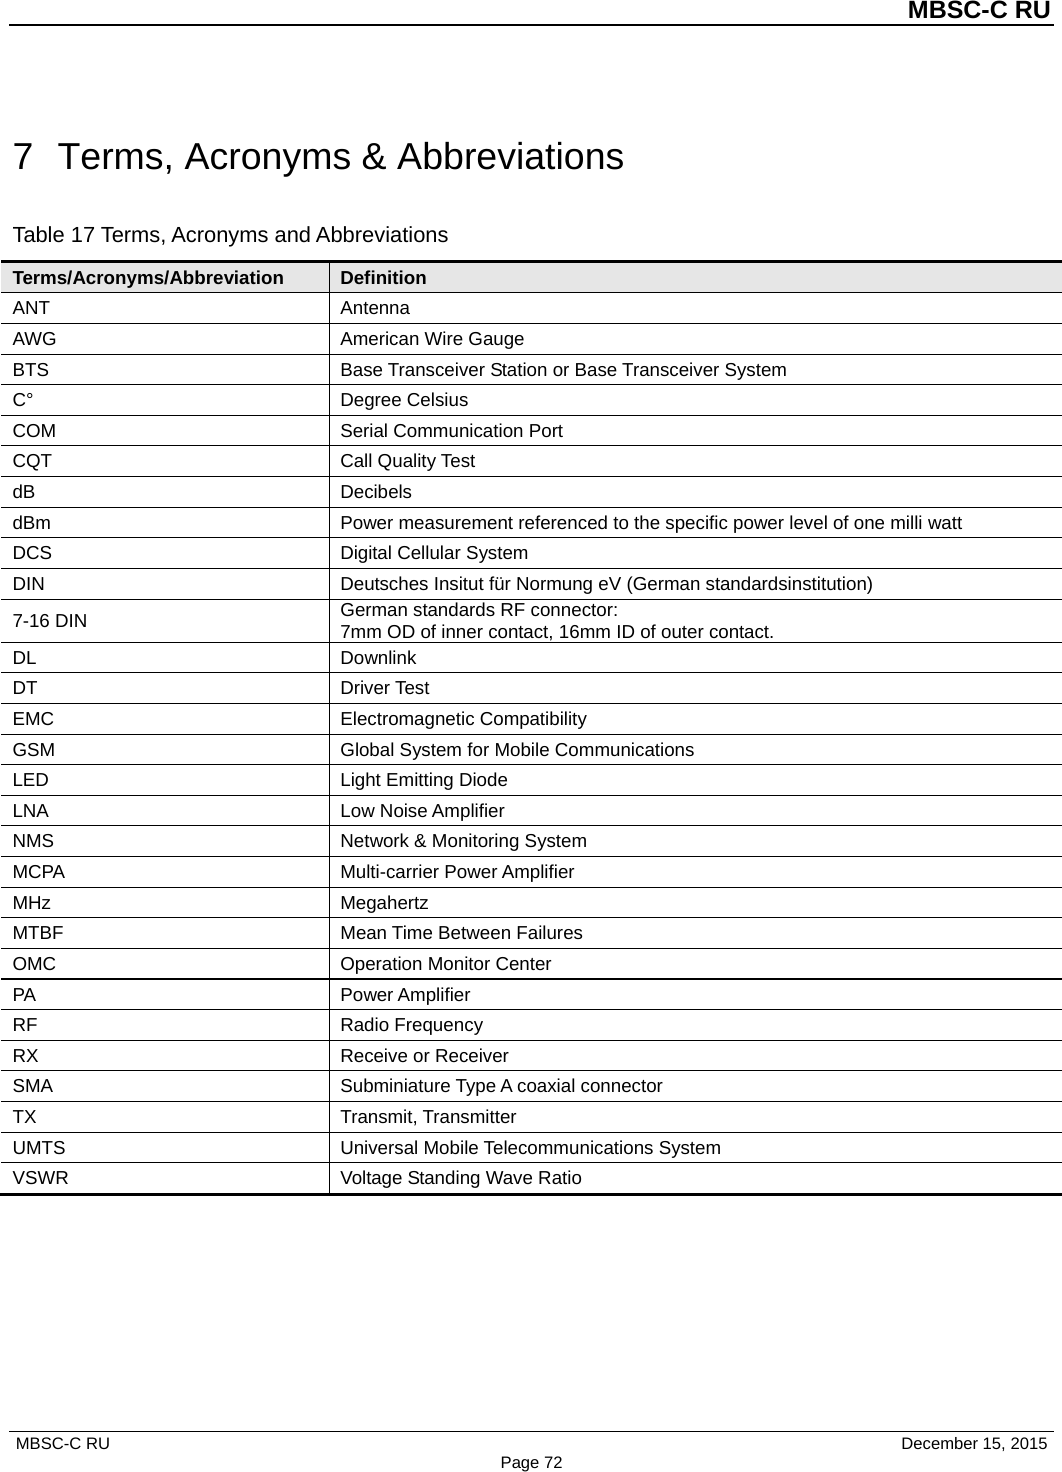          MBSC-C RU   MBSC-C RU                                     December 15, 2015 Page 72 7  Terms, Acronyms &amp; Abbreviations Table 17 Terms, Acronyms and Abbreviations Terms/Acronyms/Abbreviation Definition ANT Antenna AWG American Wire Gauge BTS  Base Transceiver Station or Base Transceiver System C°  Degree Celsius COM Serial Communication Port CQT Call Quality Test dB  Decibels dBm Power measurement referenced to the specific power level of one milli watt DCS Digital Cellular System DIN Deutsches Insitut für Normung eV (German standardsinstitution) 7-16 DIN German standards RF connector: 7mm OD of inner contact, 16mm ID of outer contact. DL Downlink DT Driver Test EMC  Electromagnetic Compatibility GSM  Global System for Mobile Communications LED Light Emitting Diode LNA Low Noise Amplifier NMS Network &amp; Monitoring System MCPA Multi-carrier Power Amplifier MHz Megahertz MTBF Mean Time Between Failures OMC  Operation Monitor Center PA Power Amplifier RF Radio Frequency RX Receive or Receiver SMA  Subminiature Type A coaxial connector TX Transmit, Transmitter UMTS Universal Mobile Telecommunications System VSWR  Voltage Standing Wave Ratio        